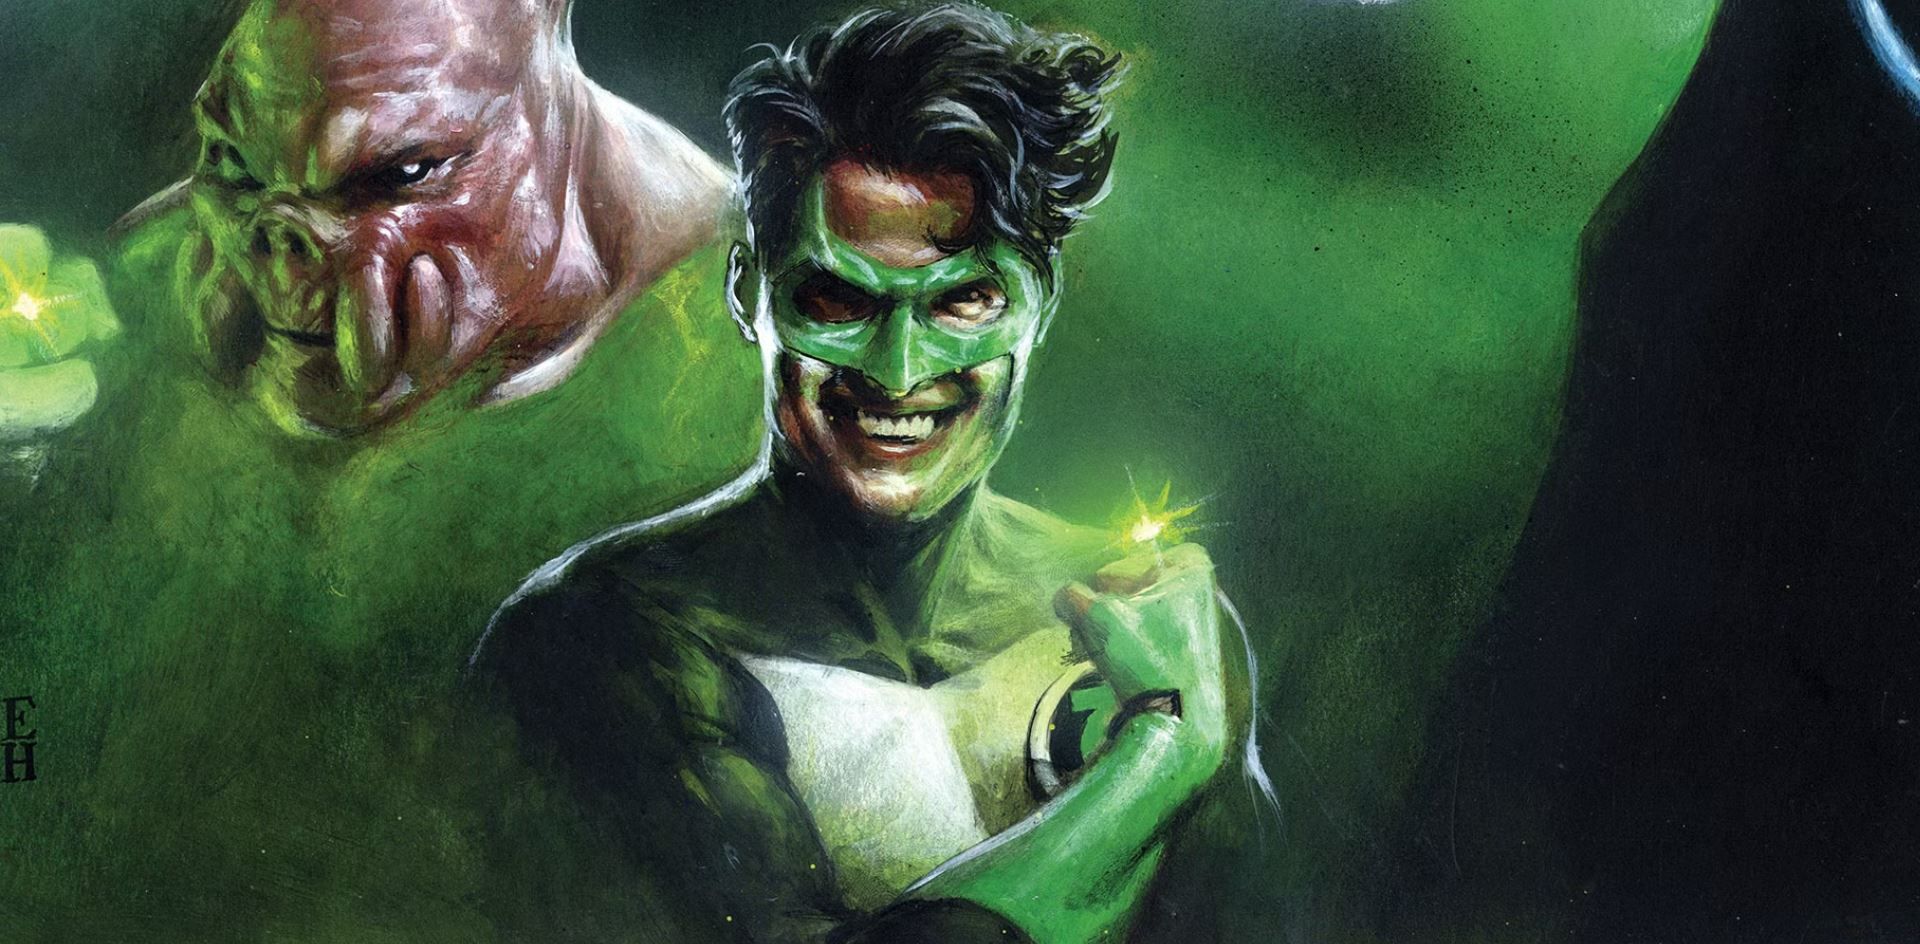 Kyle Rayner in his classic costume, surrounded by darkness, with a fellow Lantern over his left shoulder.